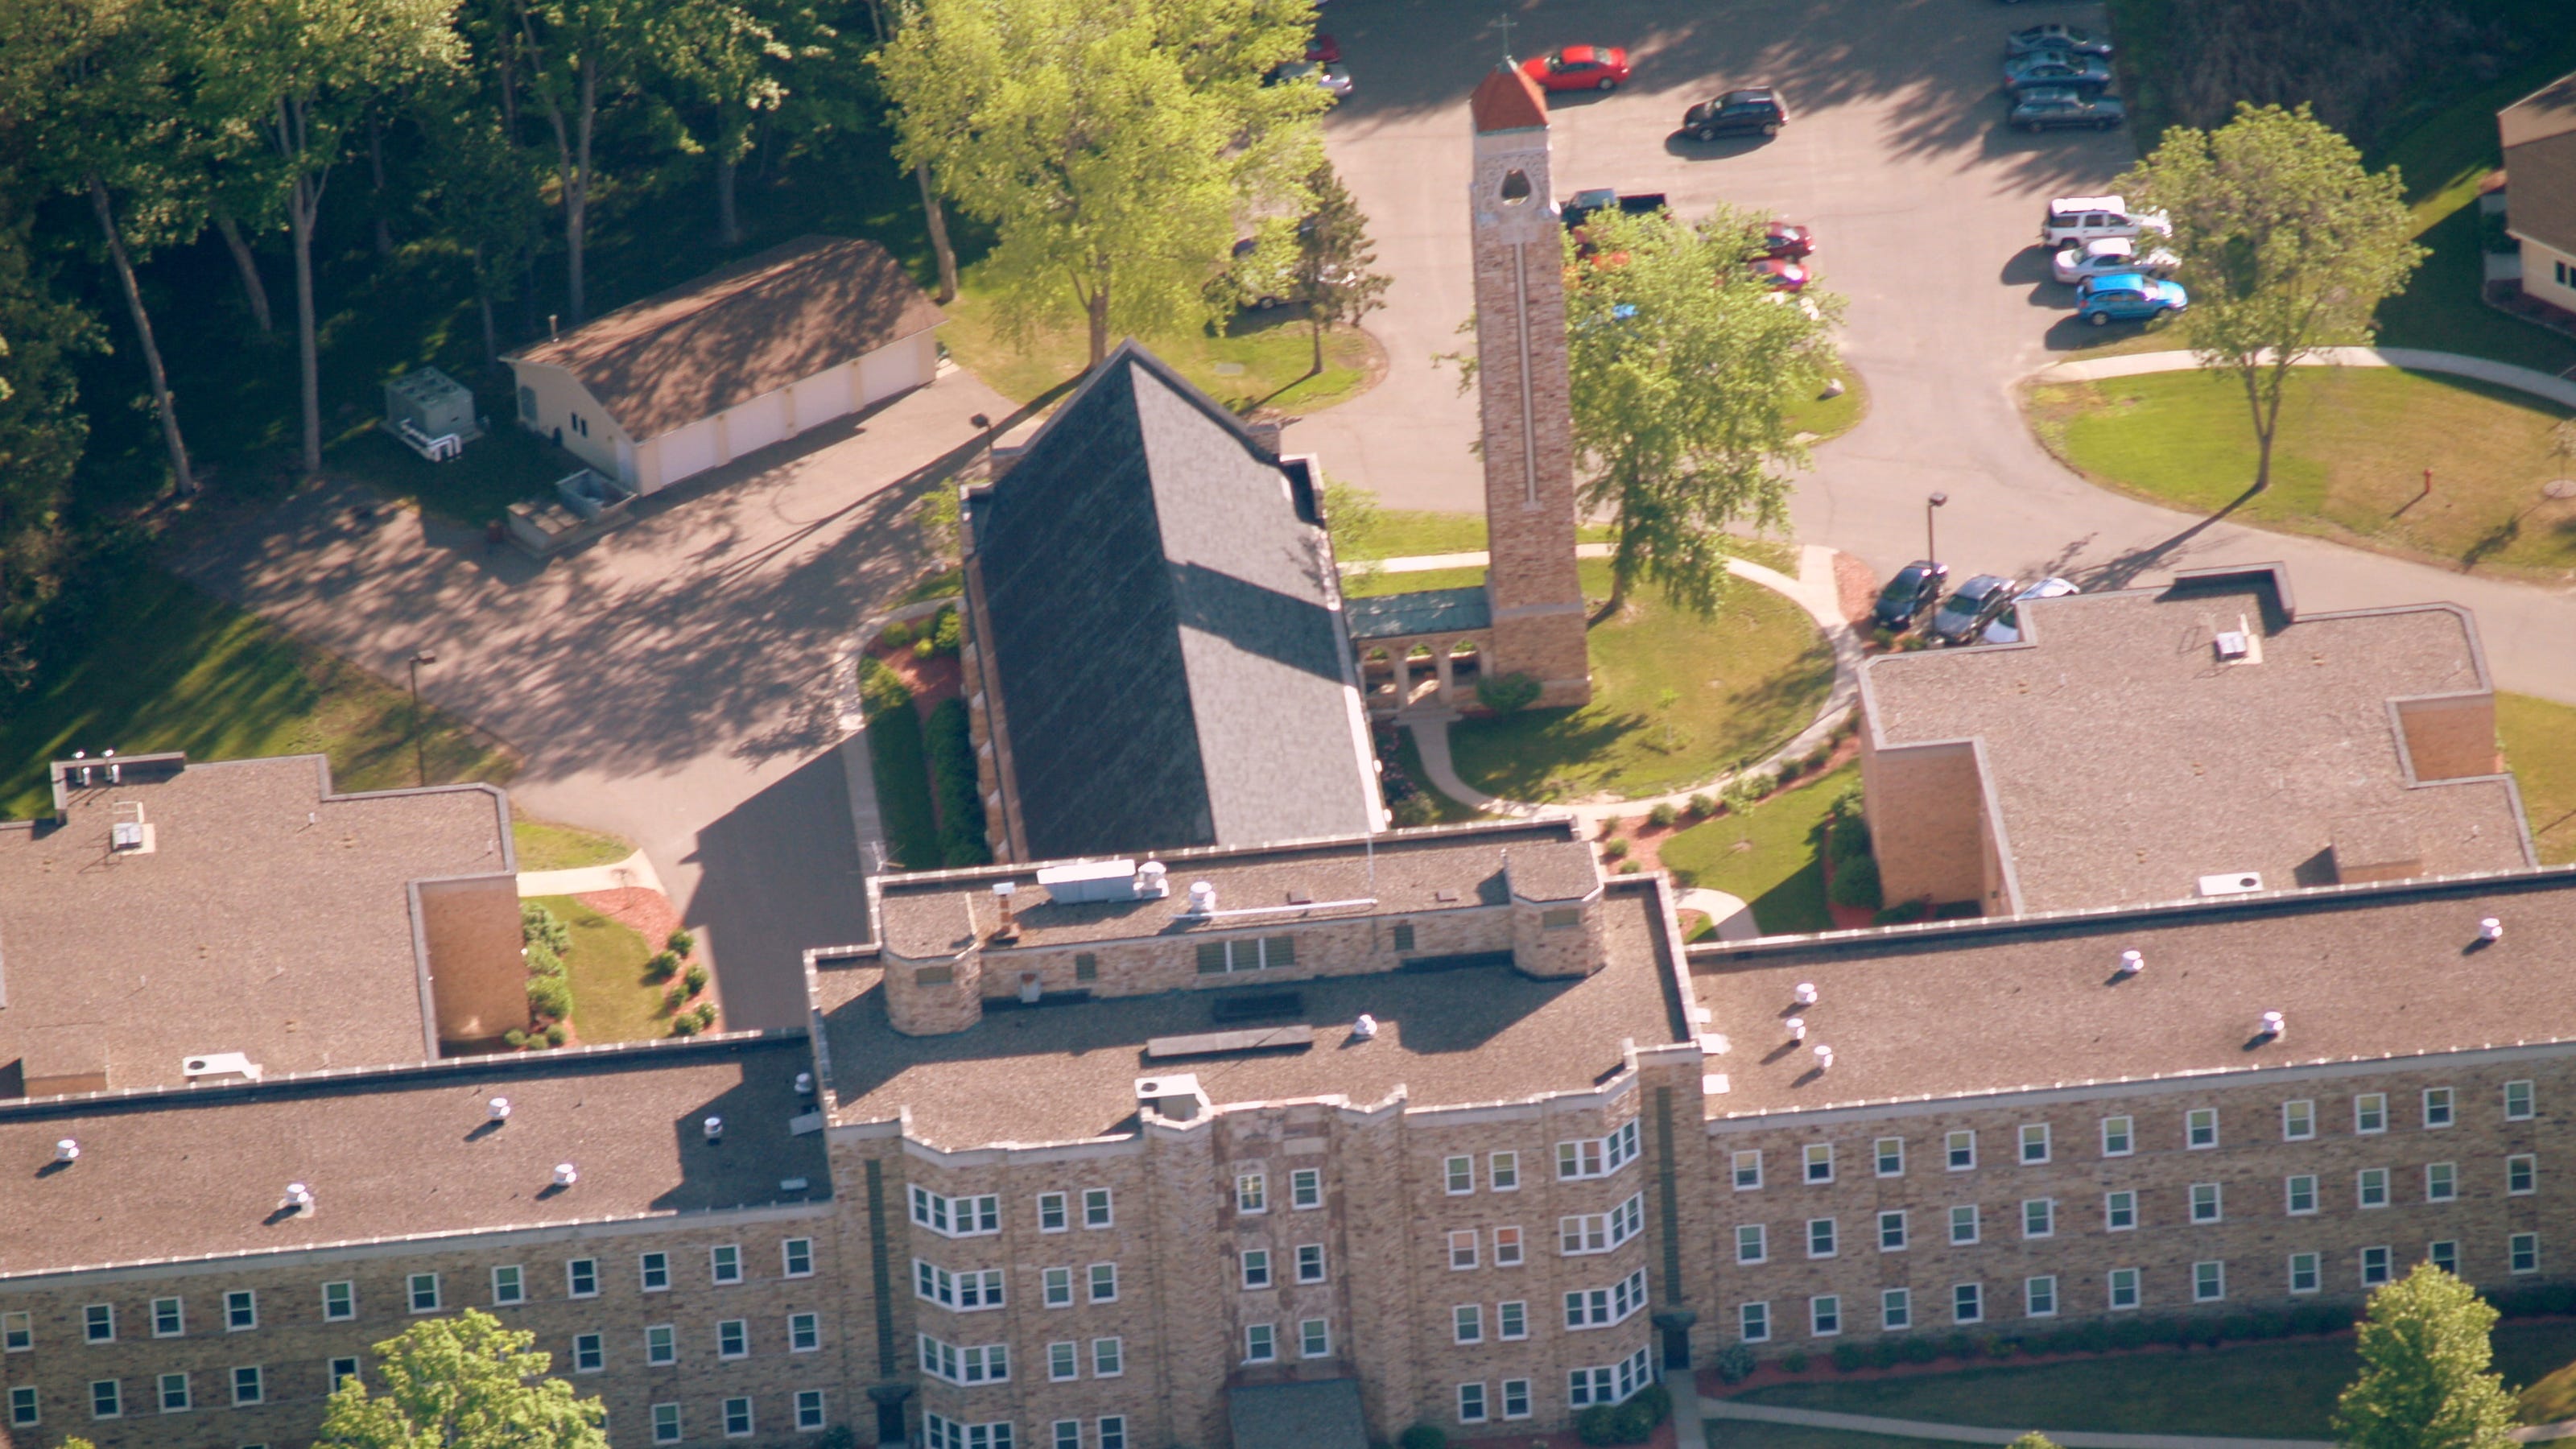 Merrill assisted living facility Bell Tower sold by Holy Cross Sisters